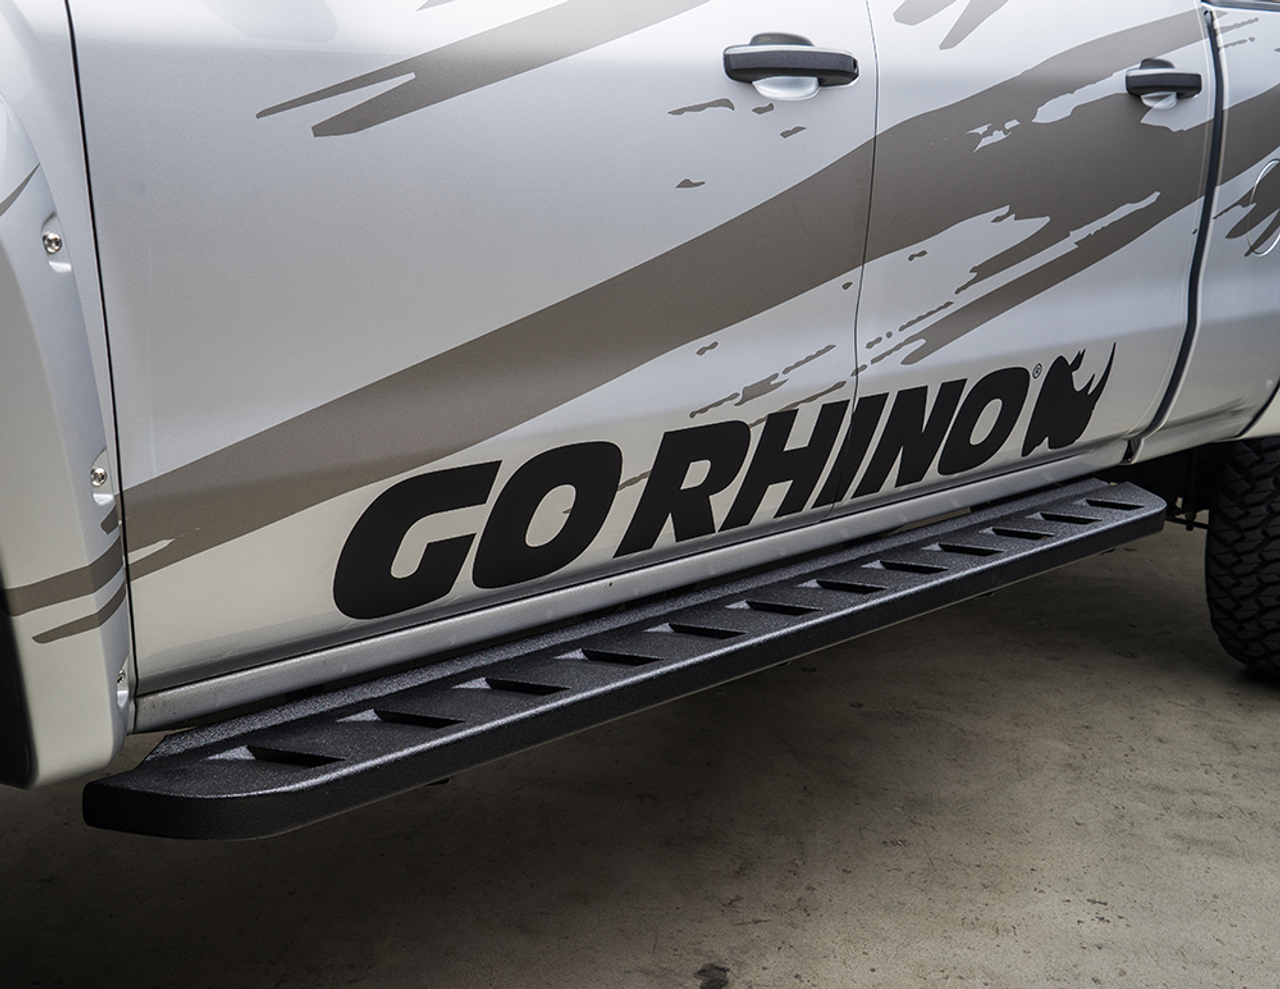 Go Rhino 63430687PC RAM, 1500, 2019 - 2021, RB10 Running boards - Complete Kit: RB10 Running boards + Brackets, Galvanized Steel, Textured black, 630087PC RB10 + 6343065 RB Brackets, New body style PU. New Body Style Only